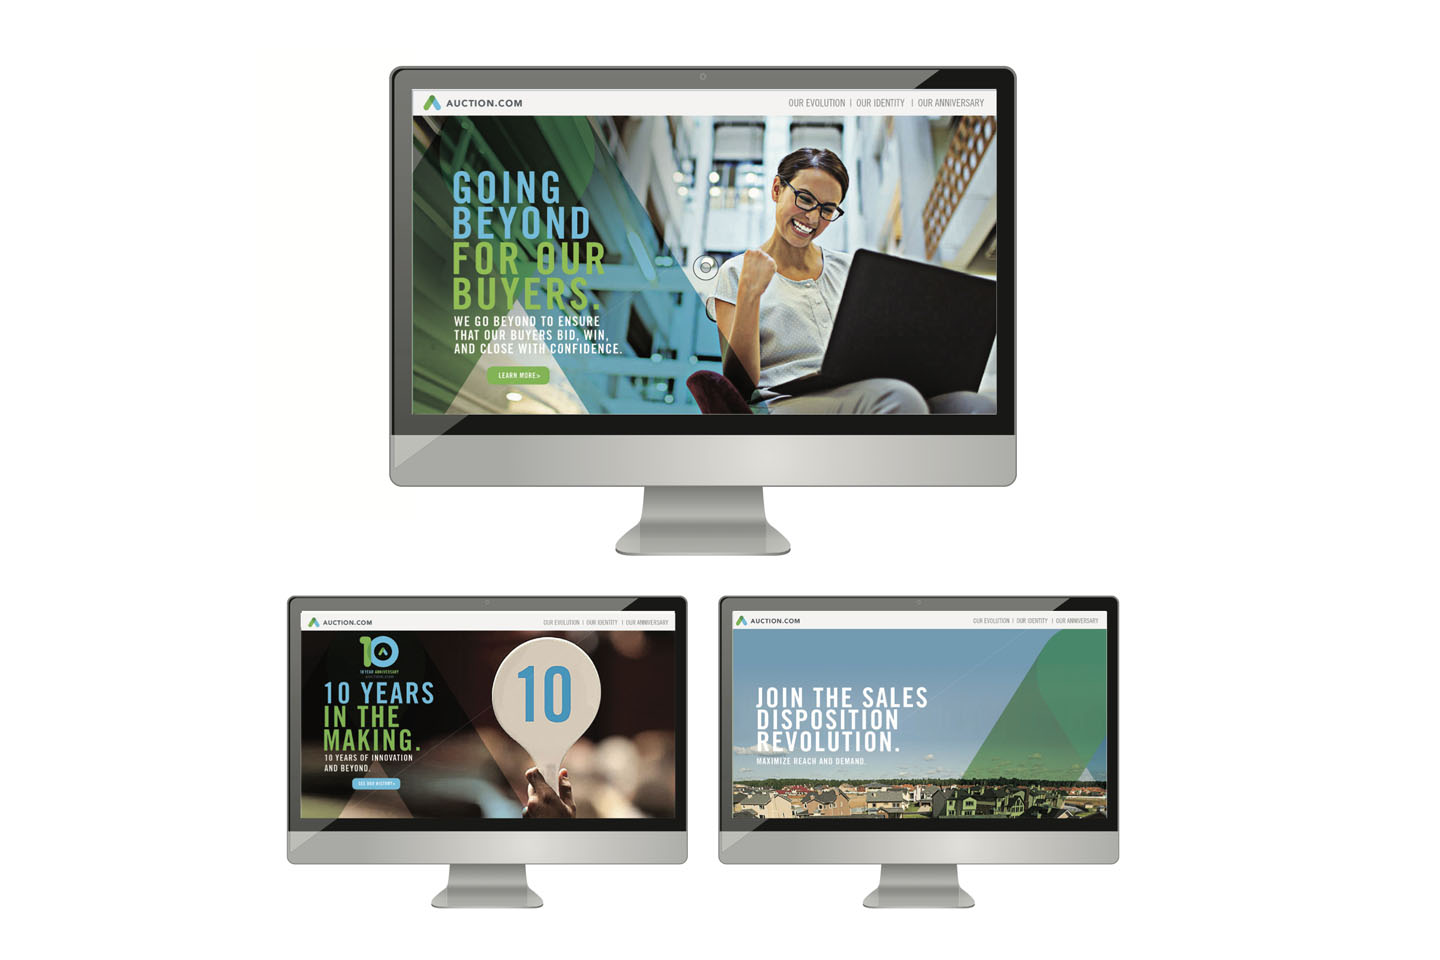 Auction.com website refresh by creative marketing agency in Costa Mesa